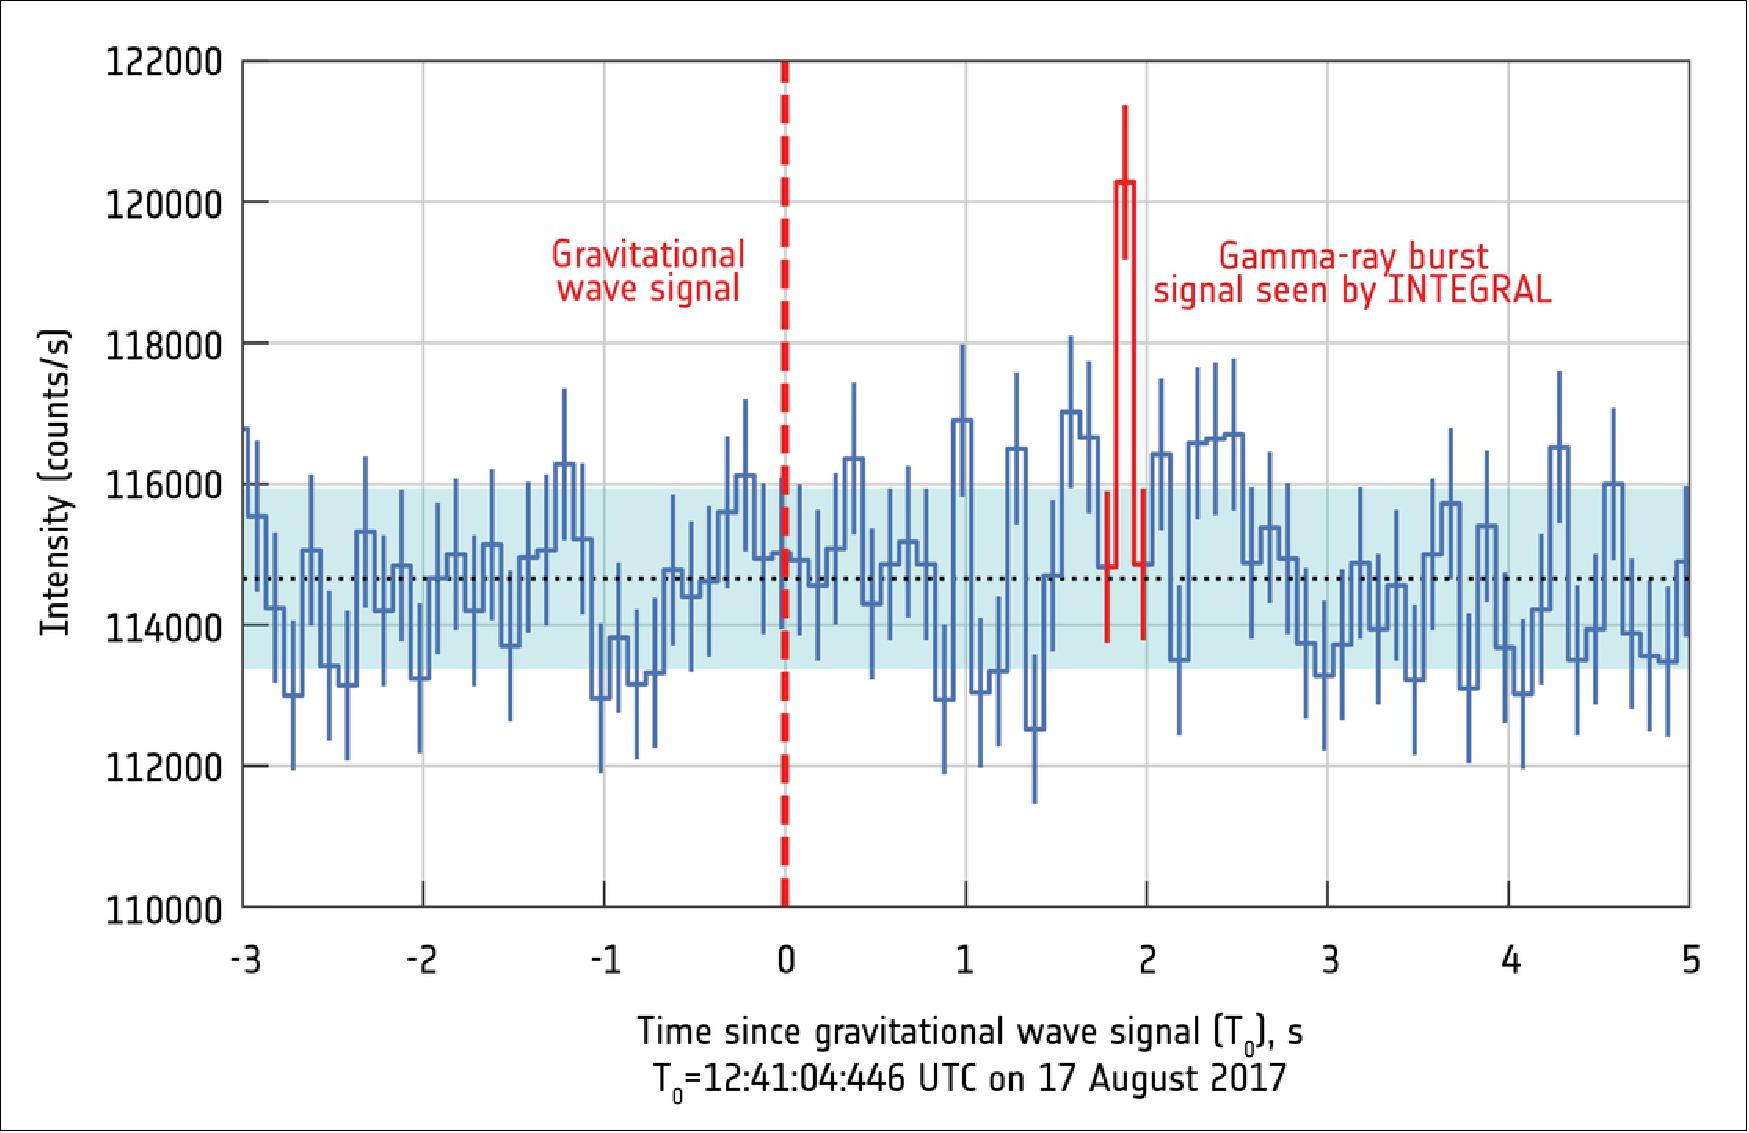 Figure 28: Gamma-ray burst after the arrival of gravitational waves (image credit: ESA/INTEGRAL/SPI/ISDC)